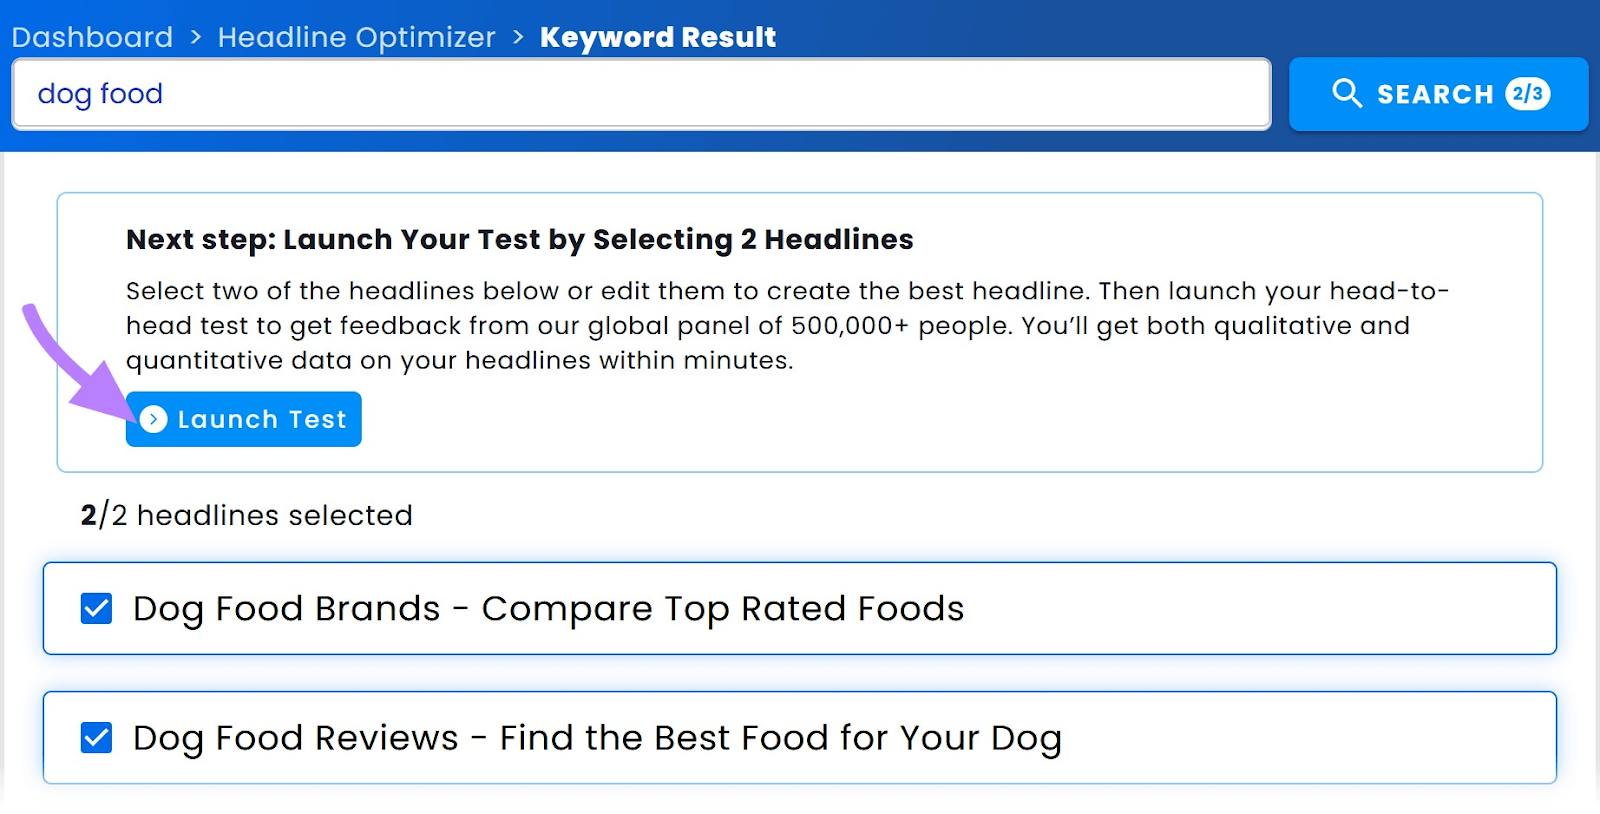 "Launch Test" by selecting two headlines you want to test